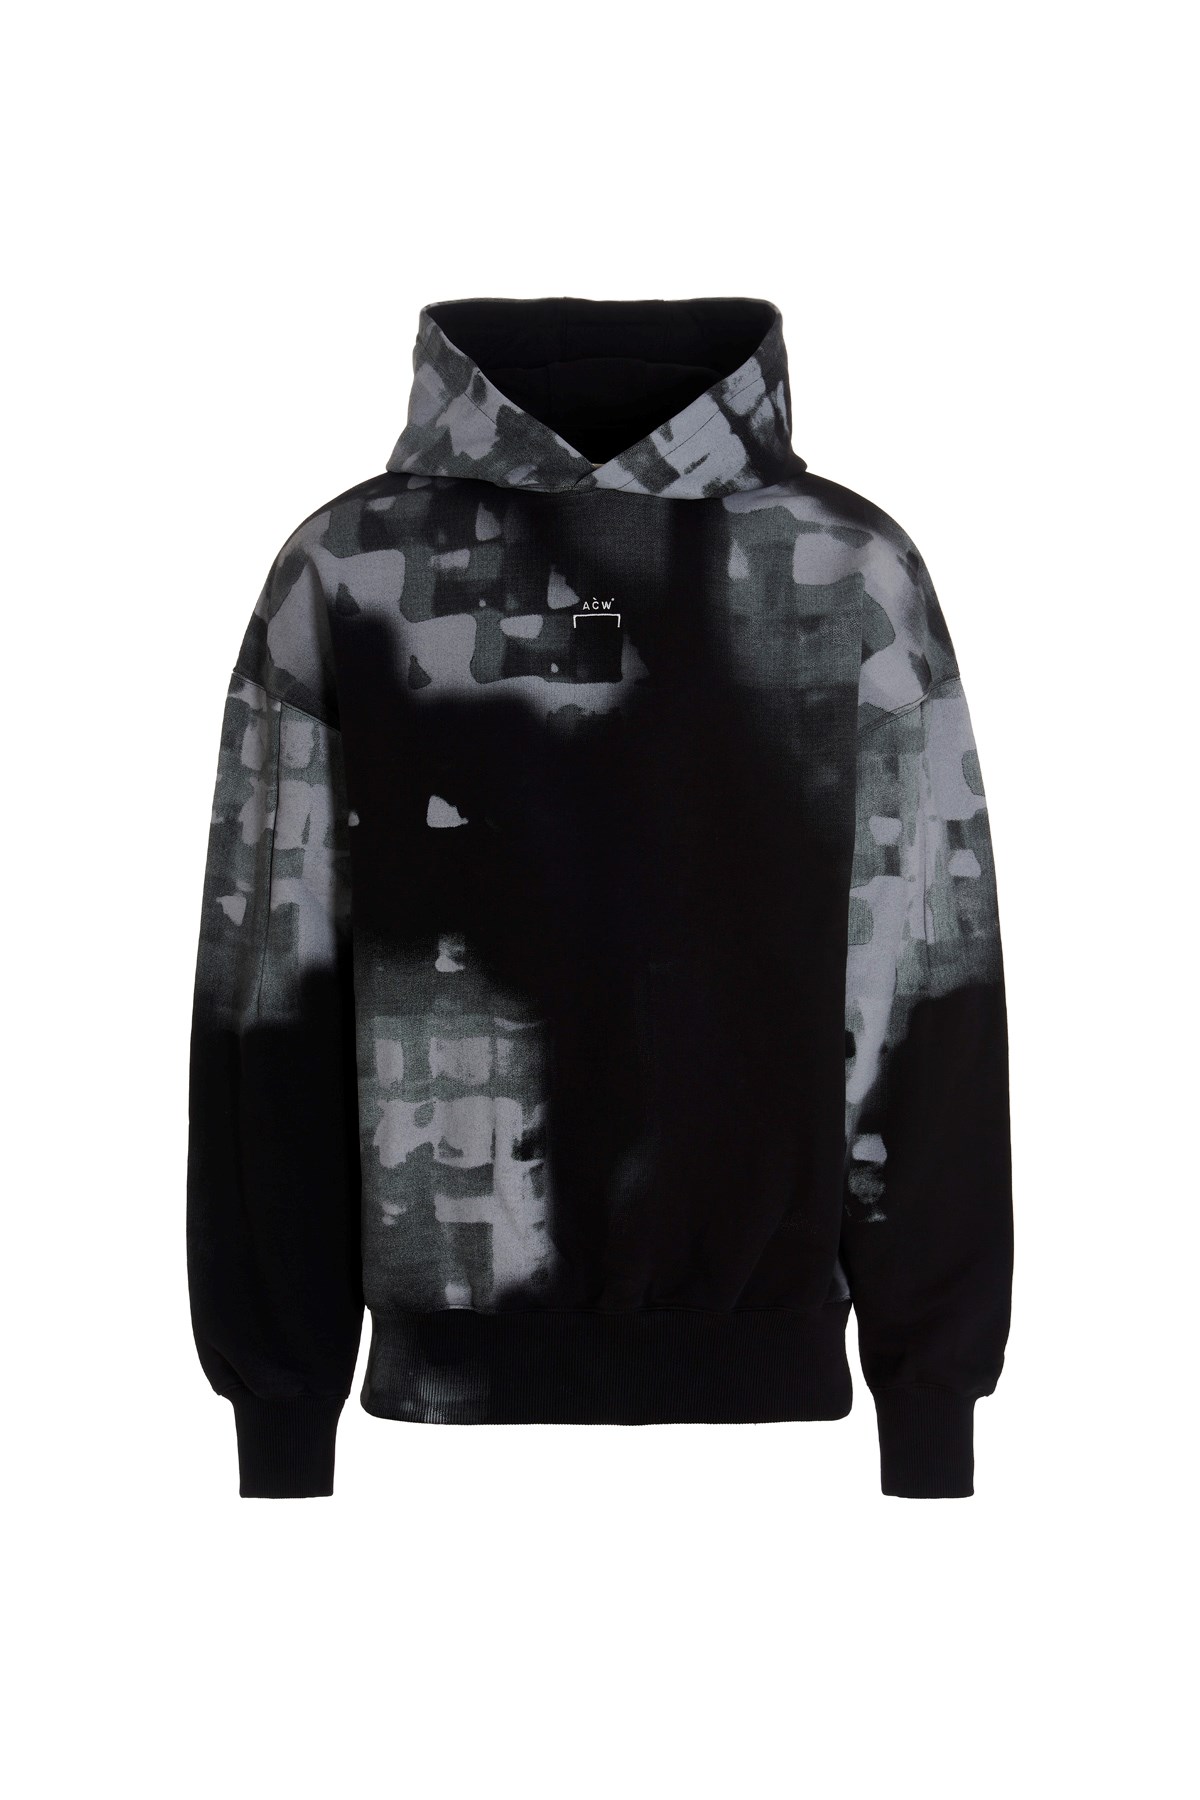 A-COLD-WALL* 'Brush Stroke’ Hoodie